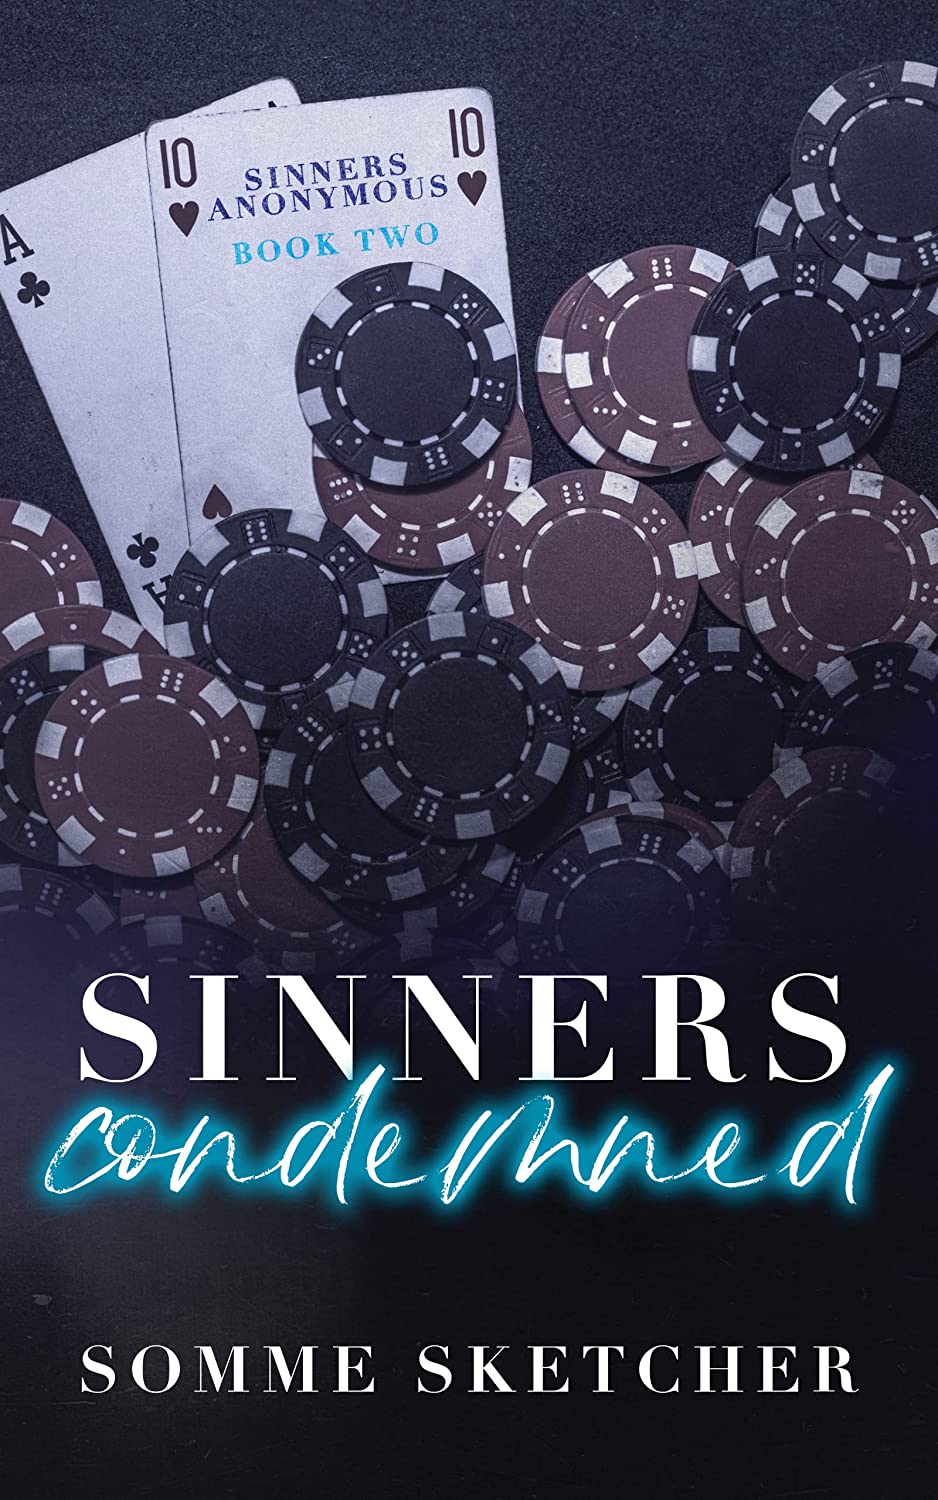 Sinners condemned by Somme Sketcher PDF Download Video Library 